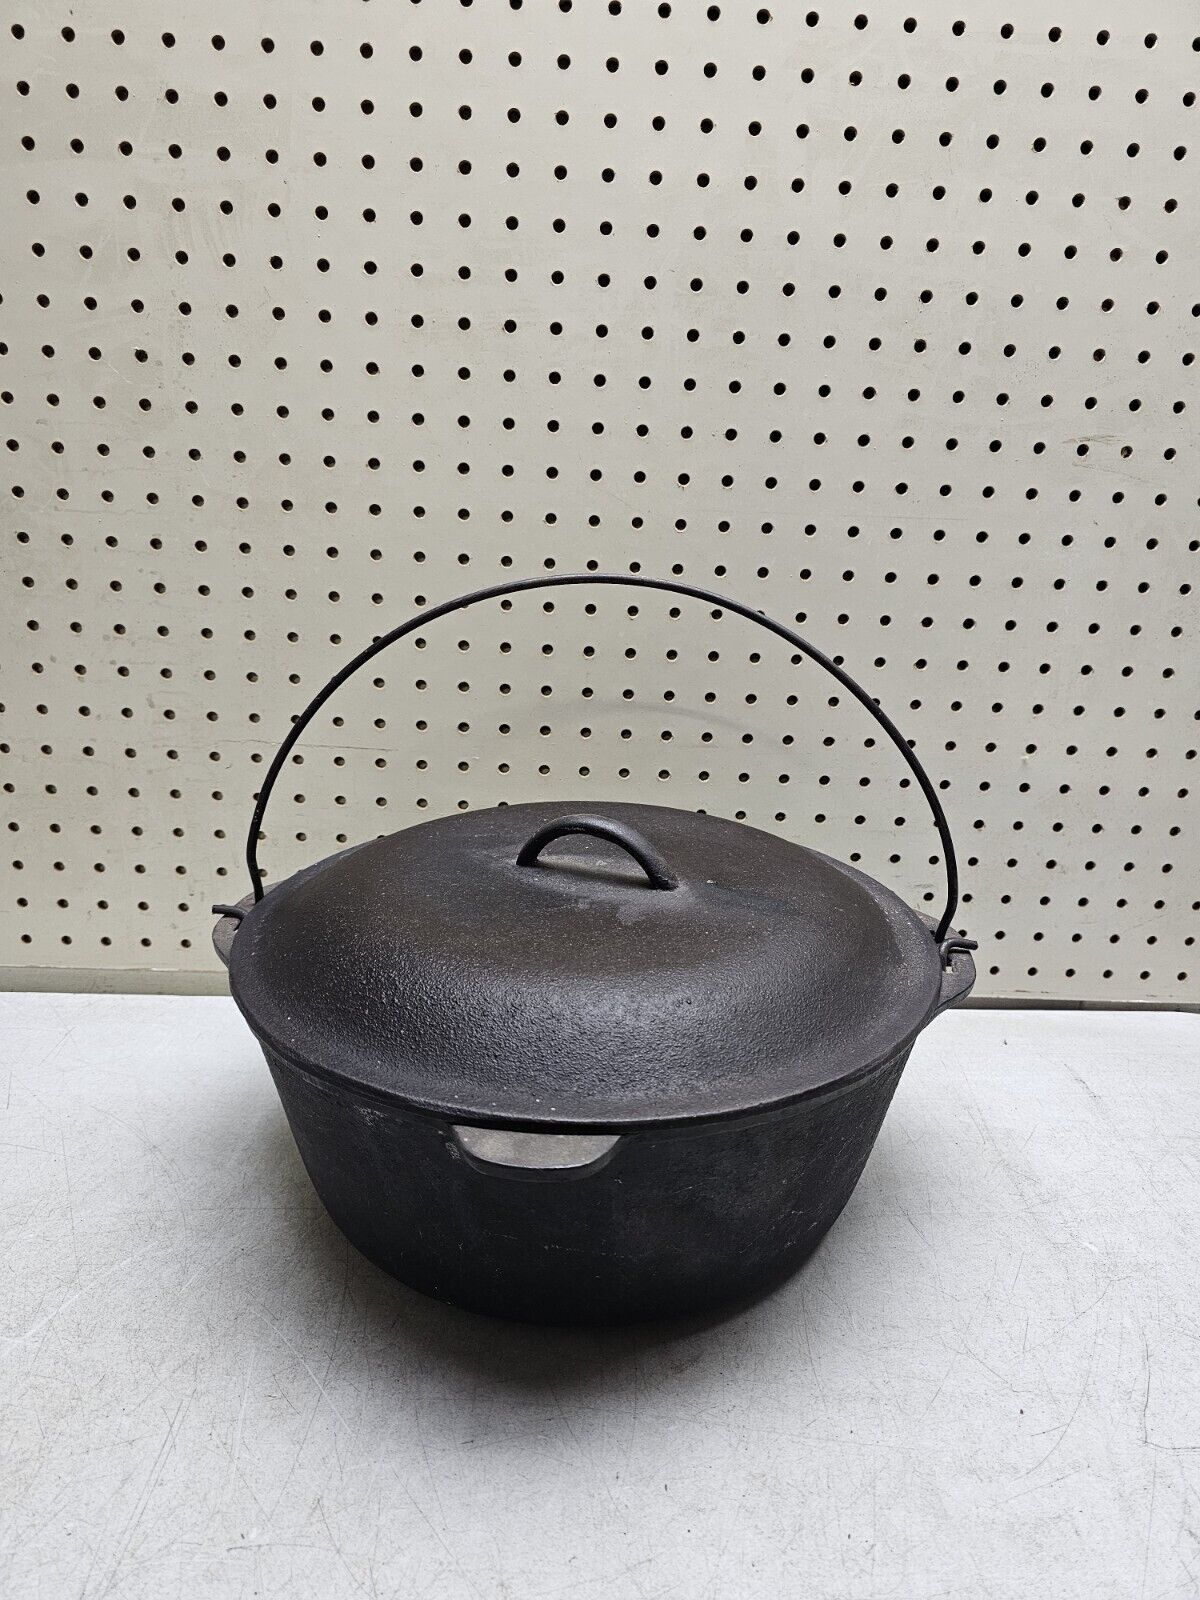 Vintage Cast Iron Dutch Oven 10 Inch With Lid and Handle Good Condition Cookware